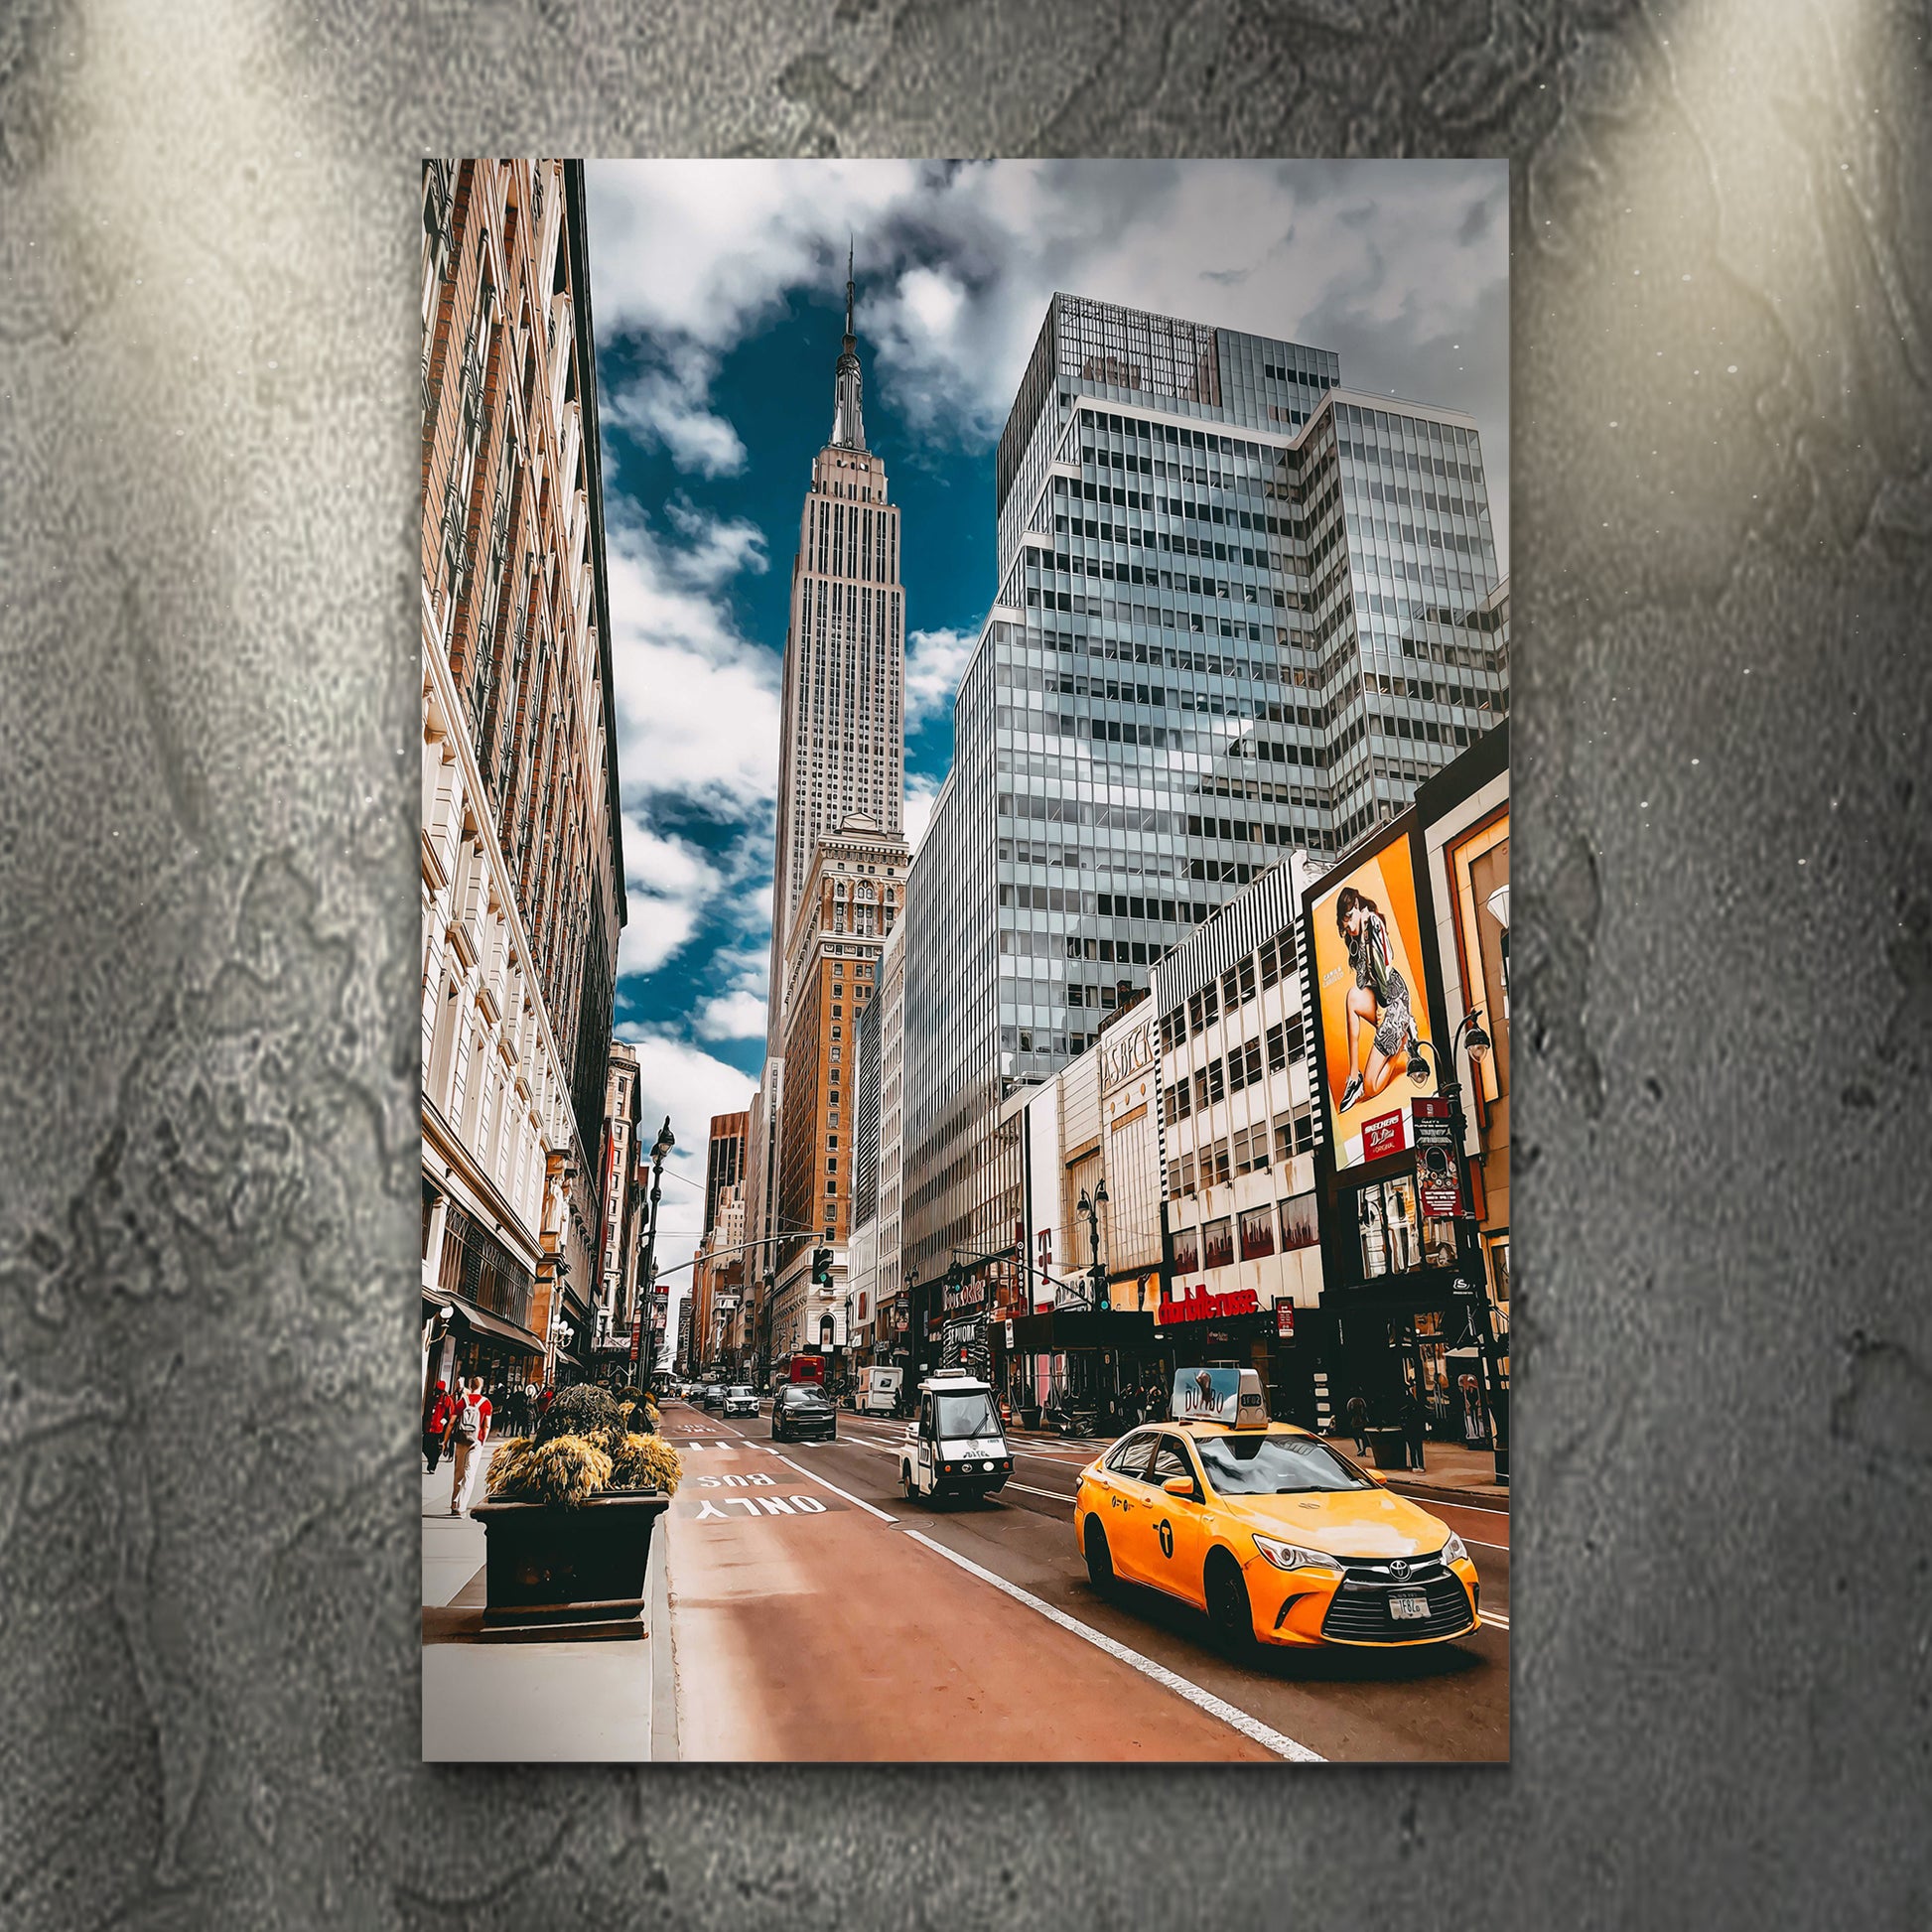 Along The Street Of New York City Canvas Wall Art - Image by Tailored Canvases